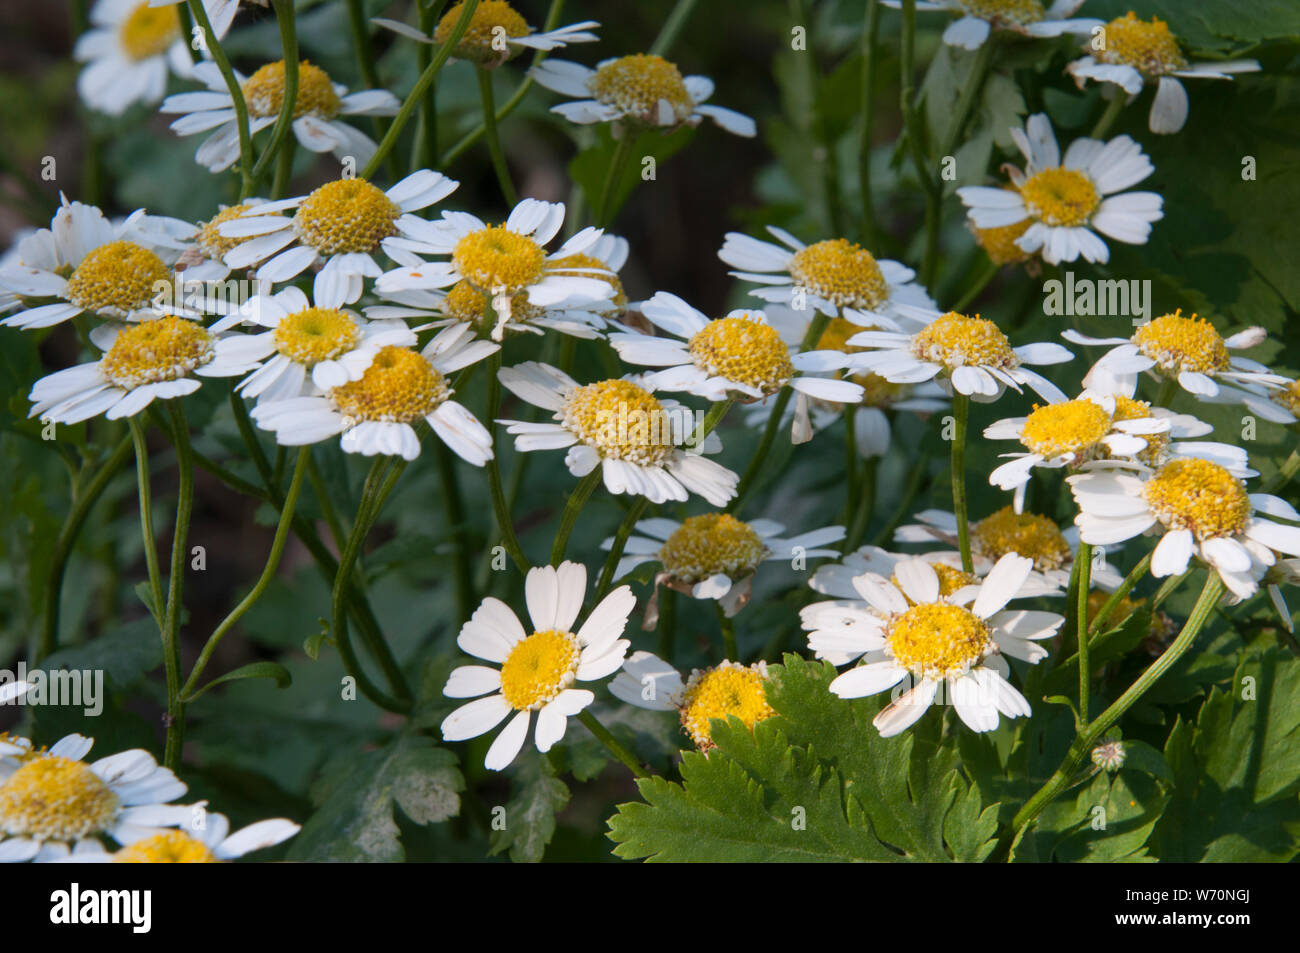 Sydney Australia, Tanacetum Parthenium or Feverfew is a medicinal herb that is used to prevent migraine headaches Stock Photo